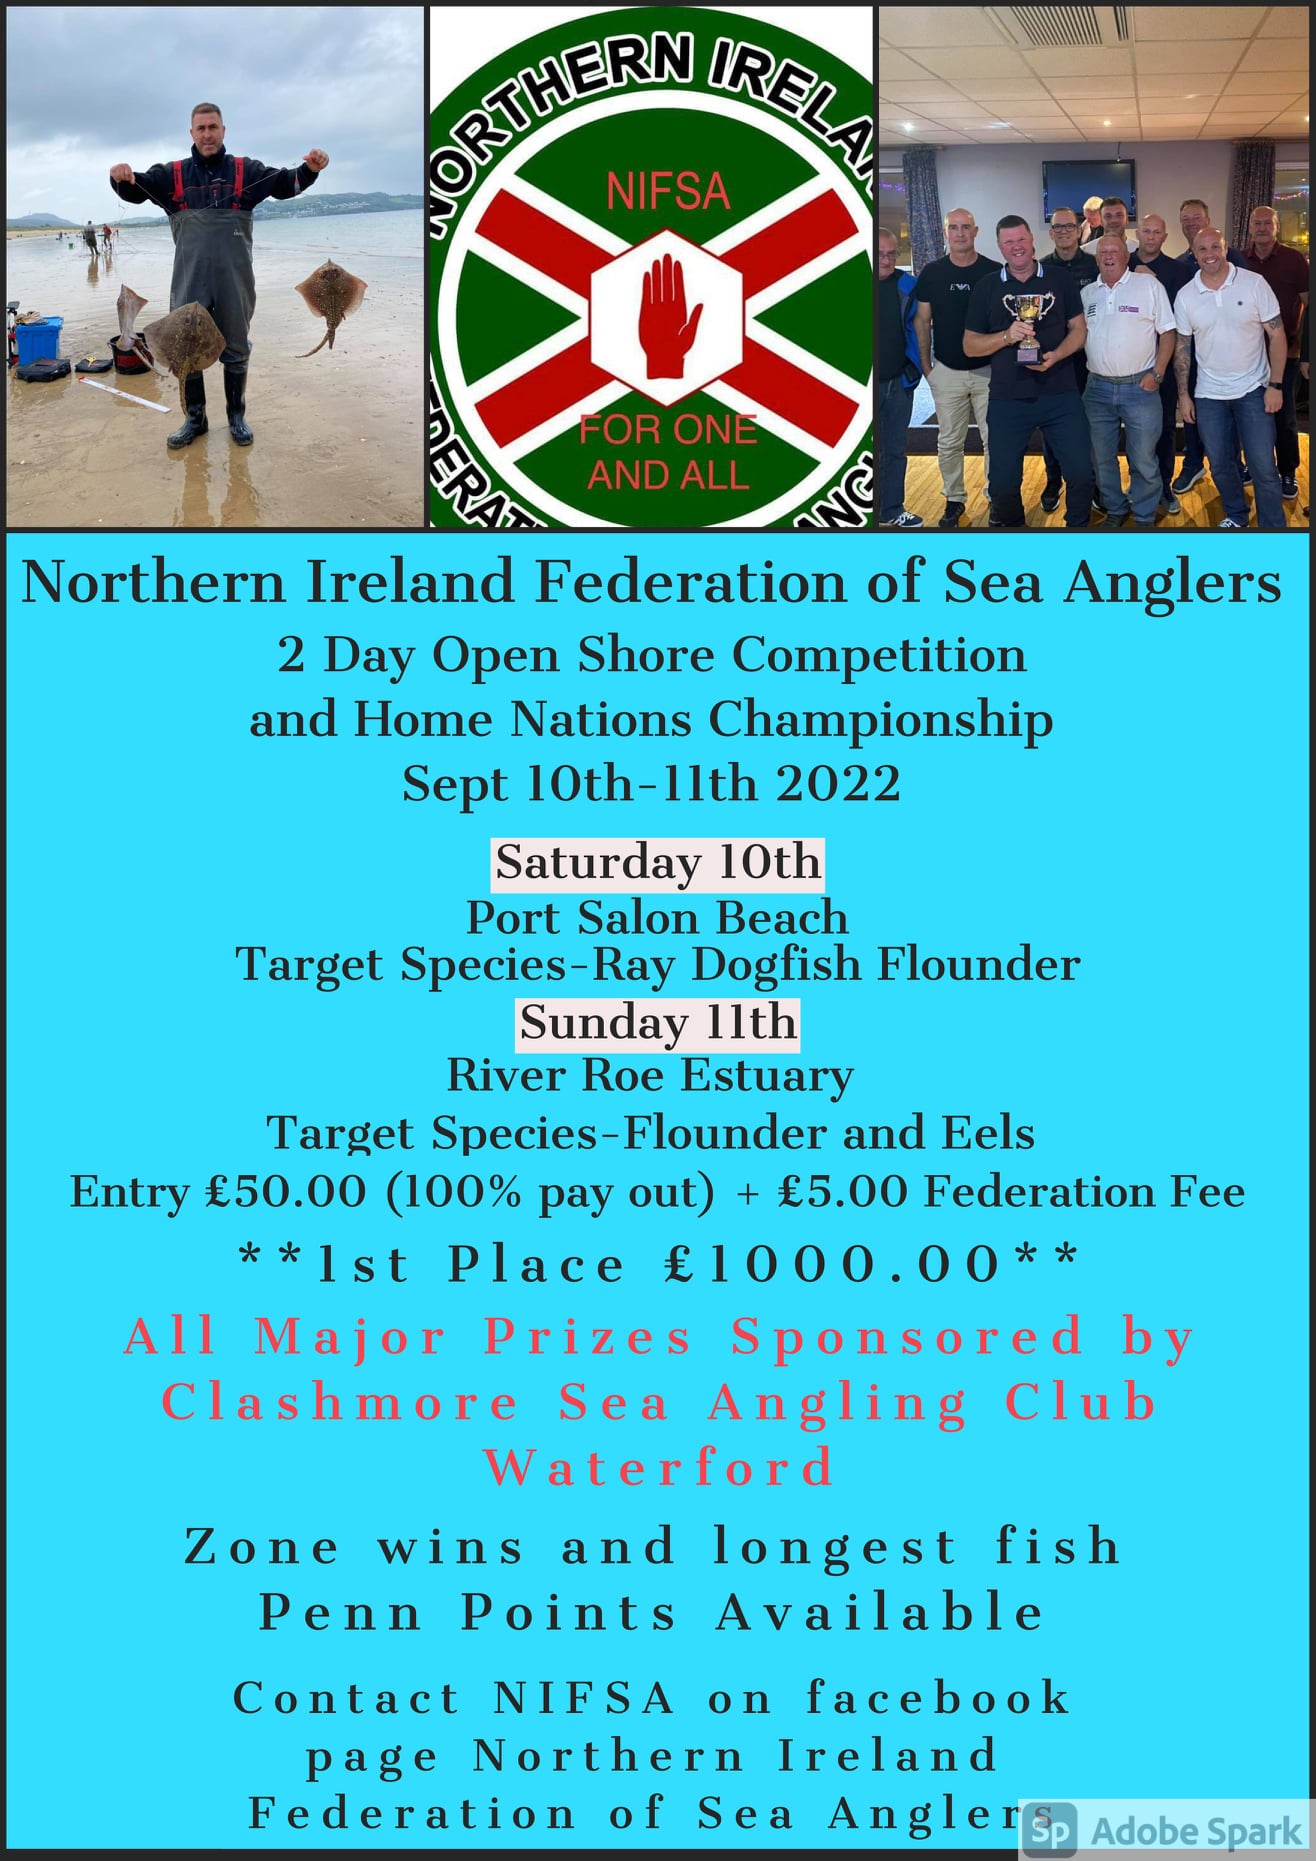 Get entered into our 2 day open shore competition next September